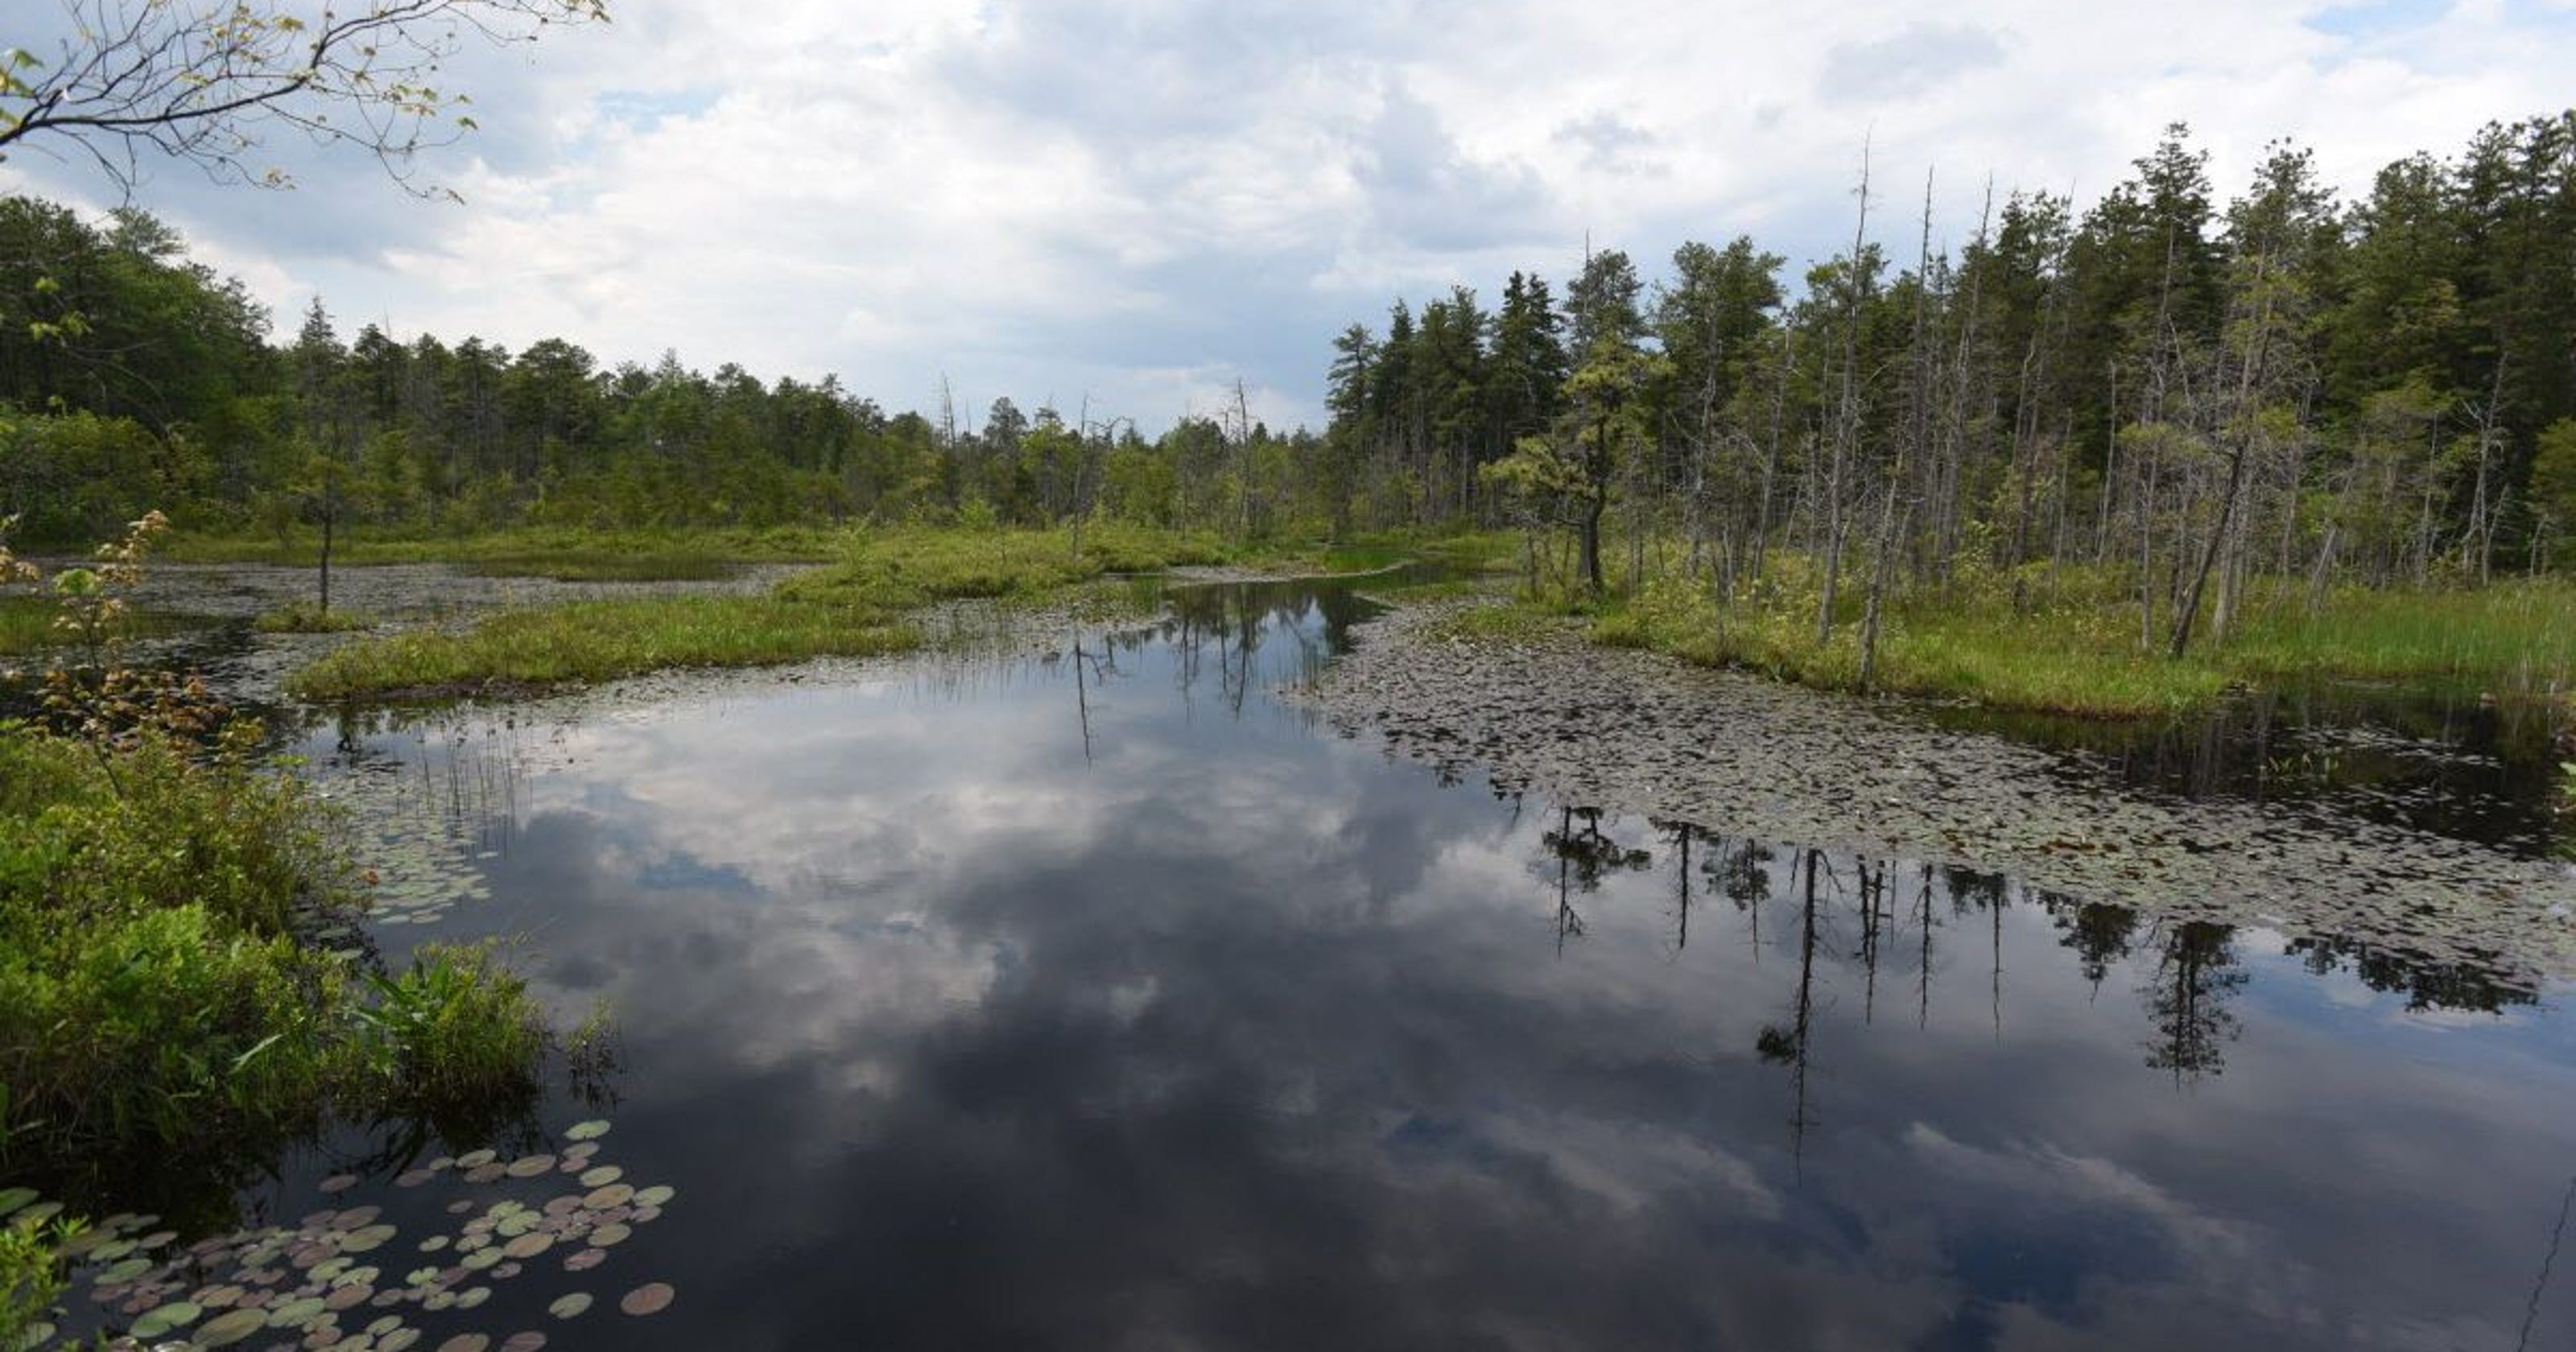 13 Things You Might Not Know About the New Jersey Pine Barrens